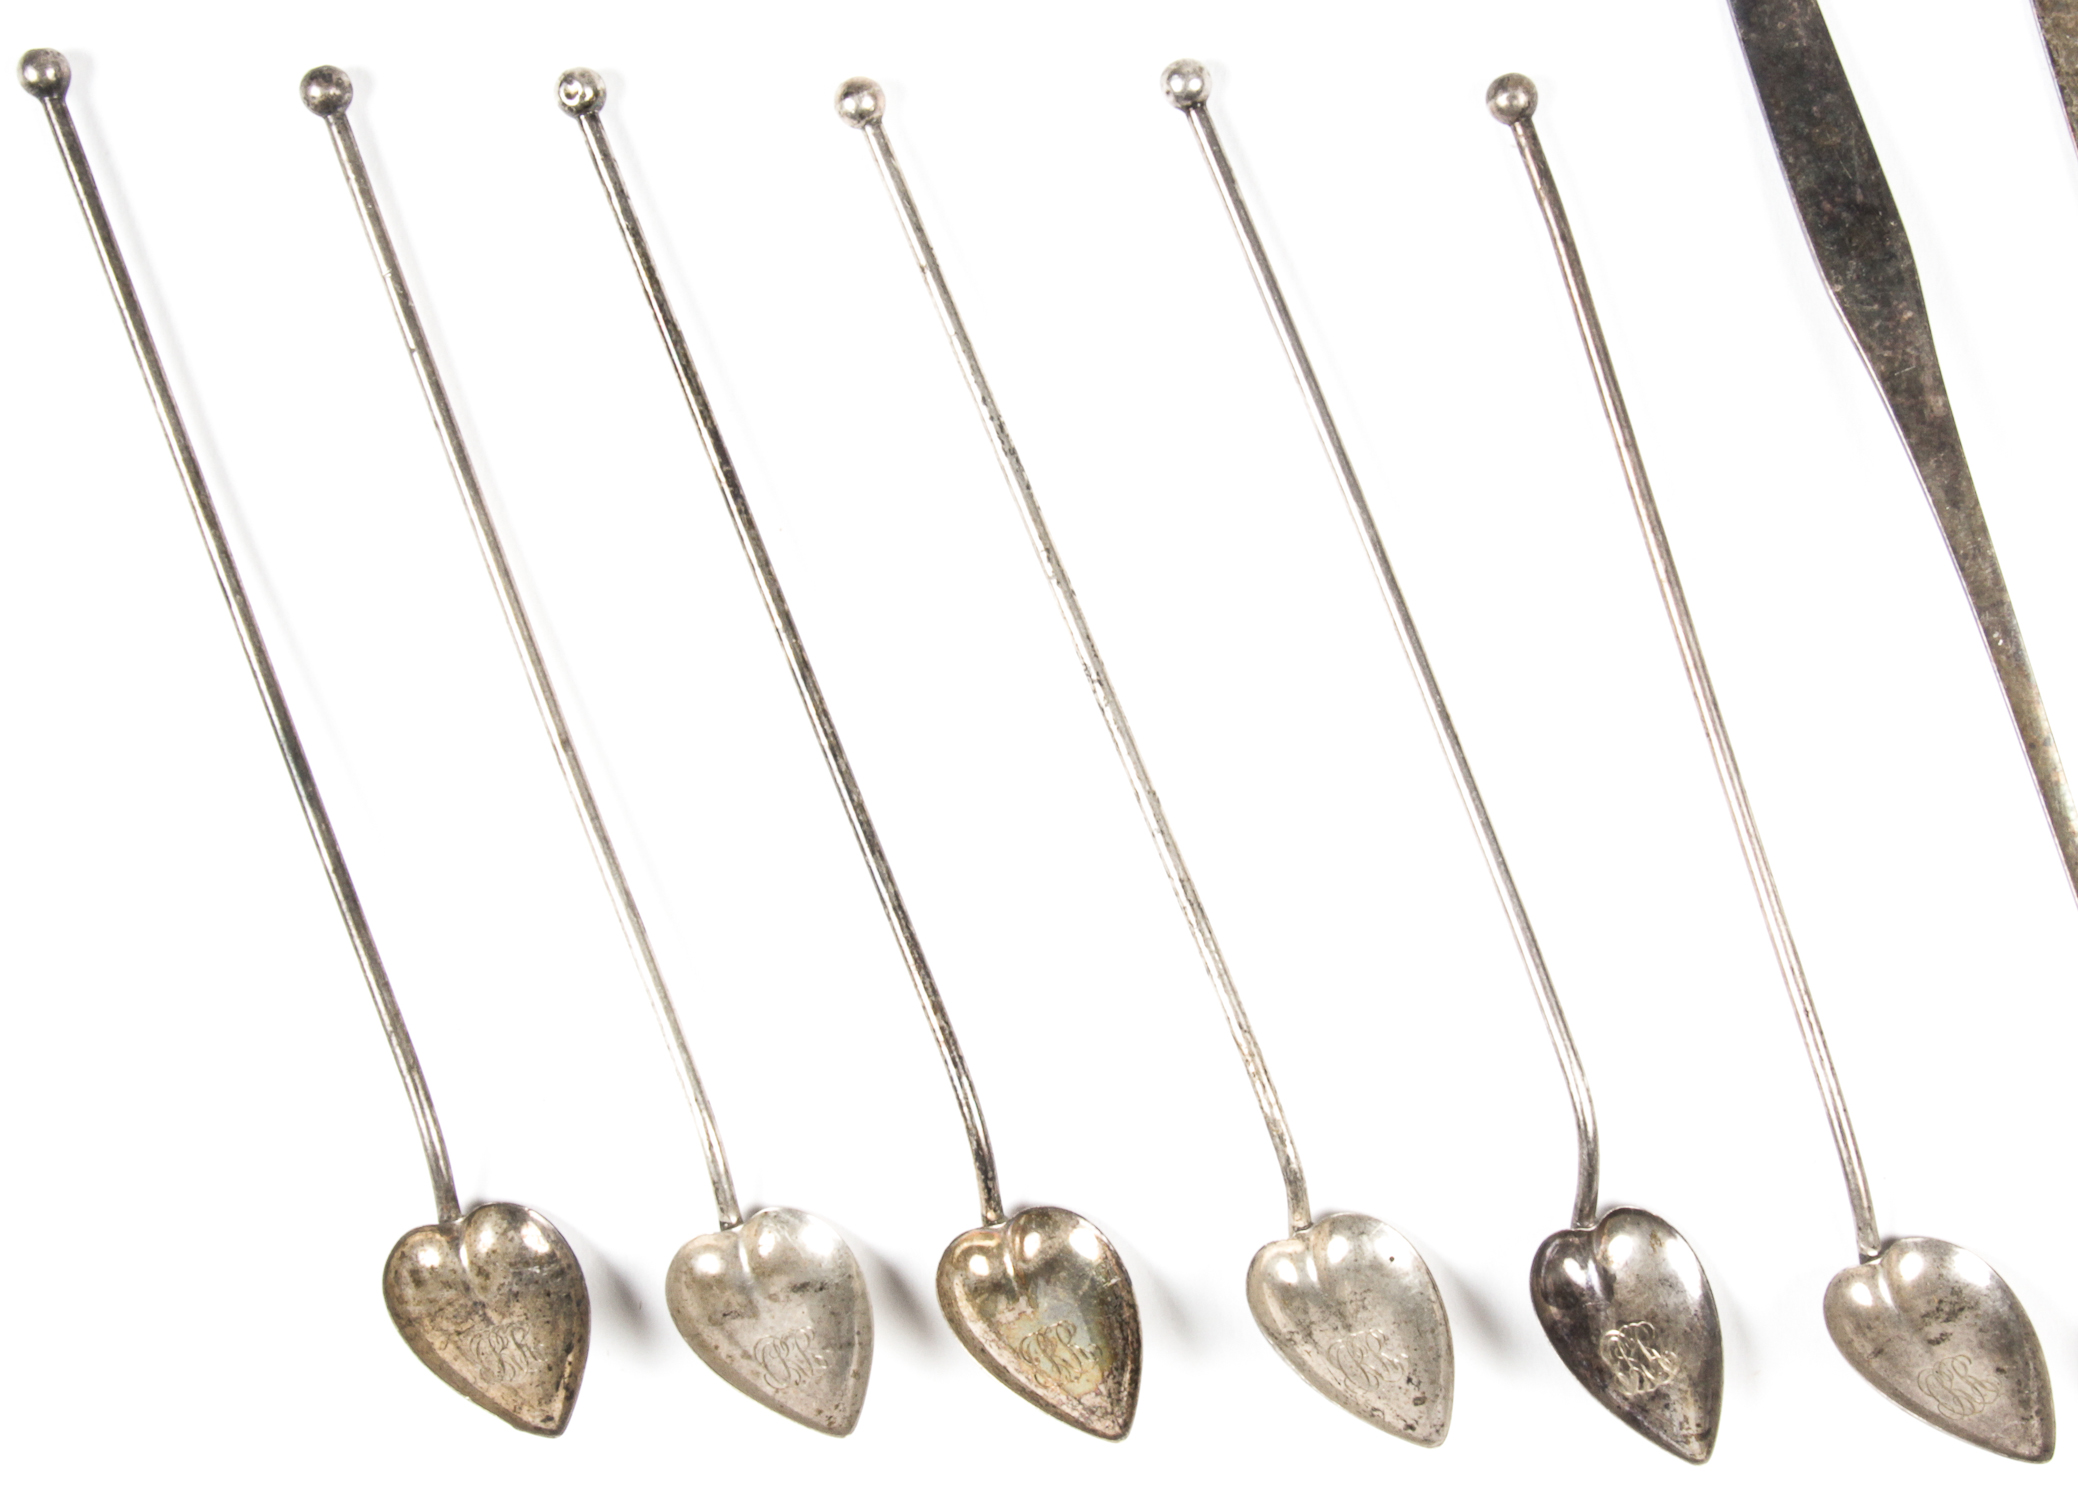 Julep Spoons. Consisting of 6 sterling julep spoon straws and 10 modern German WMI plated spoons. - Image 2 of 6